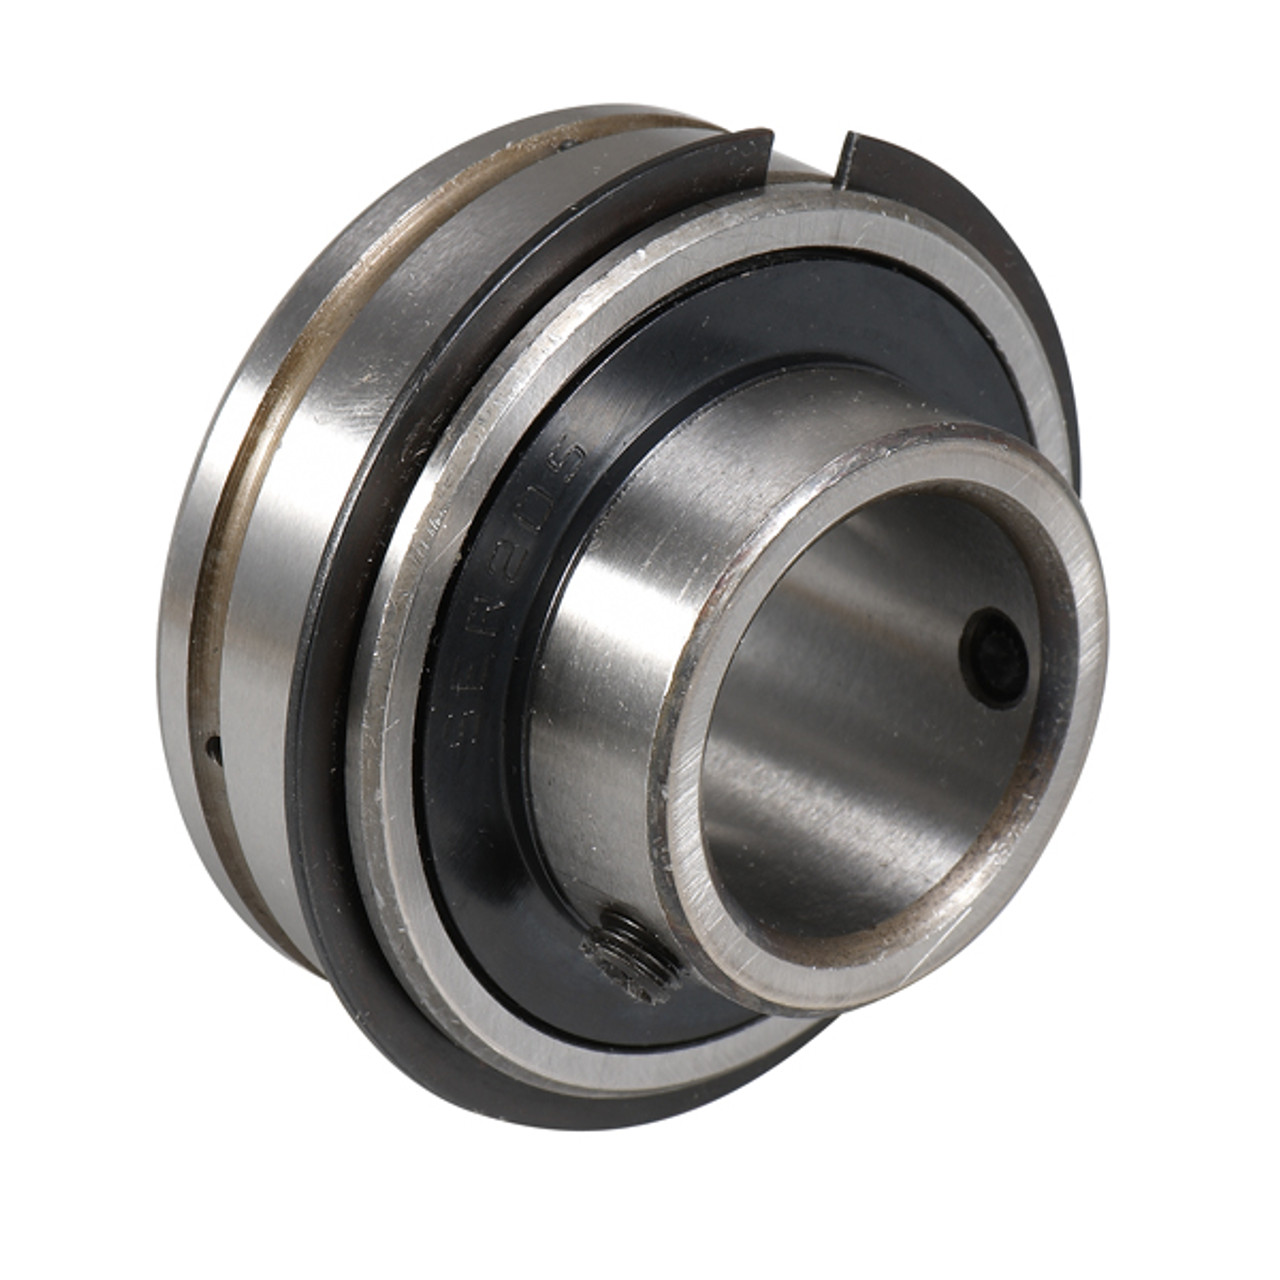 SER207 GENERIC 35mm Normal duty bearing insert with a parallel outer race and grubscrew locking - Metric Thumbnail